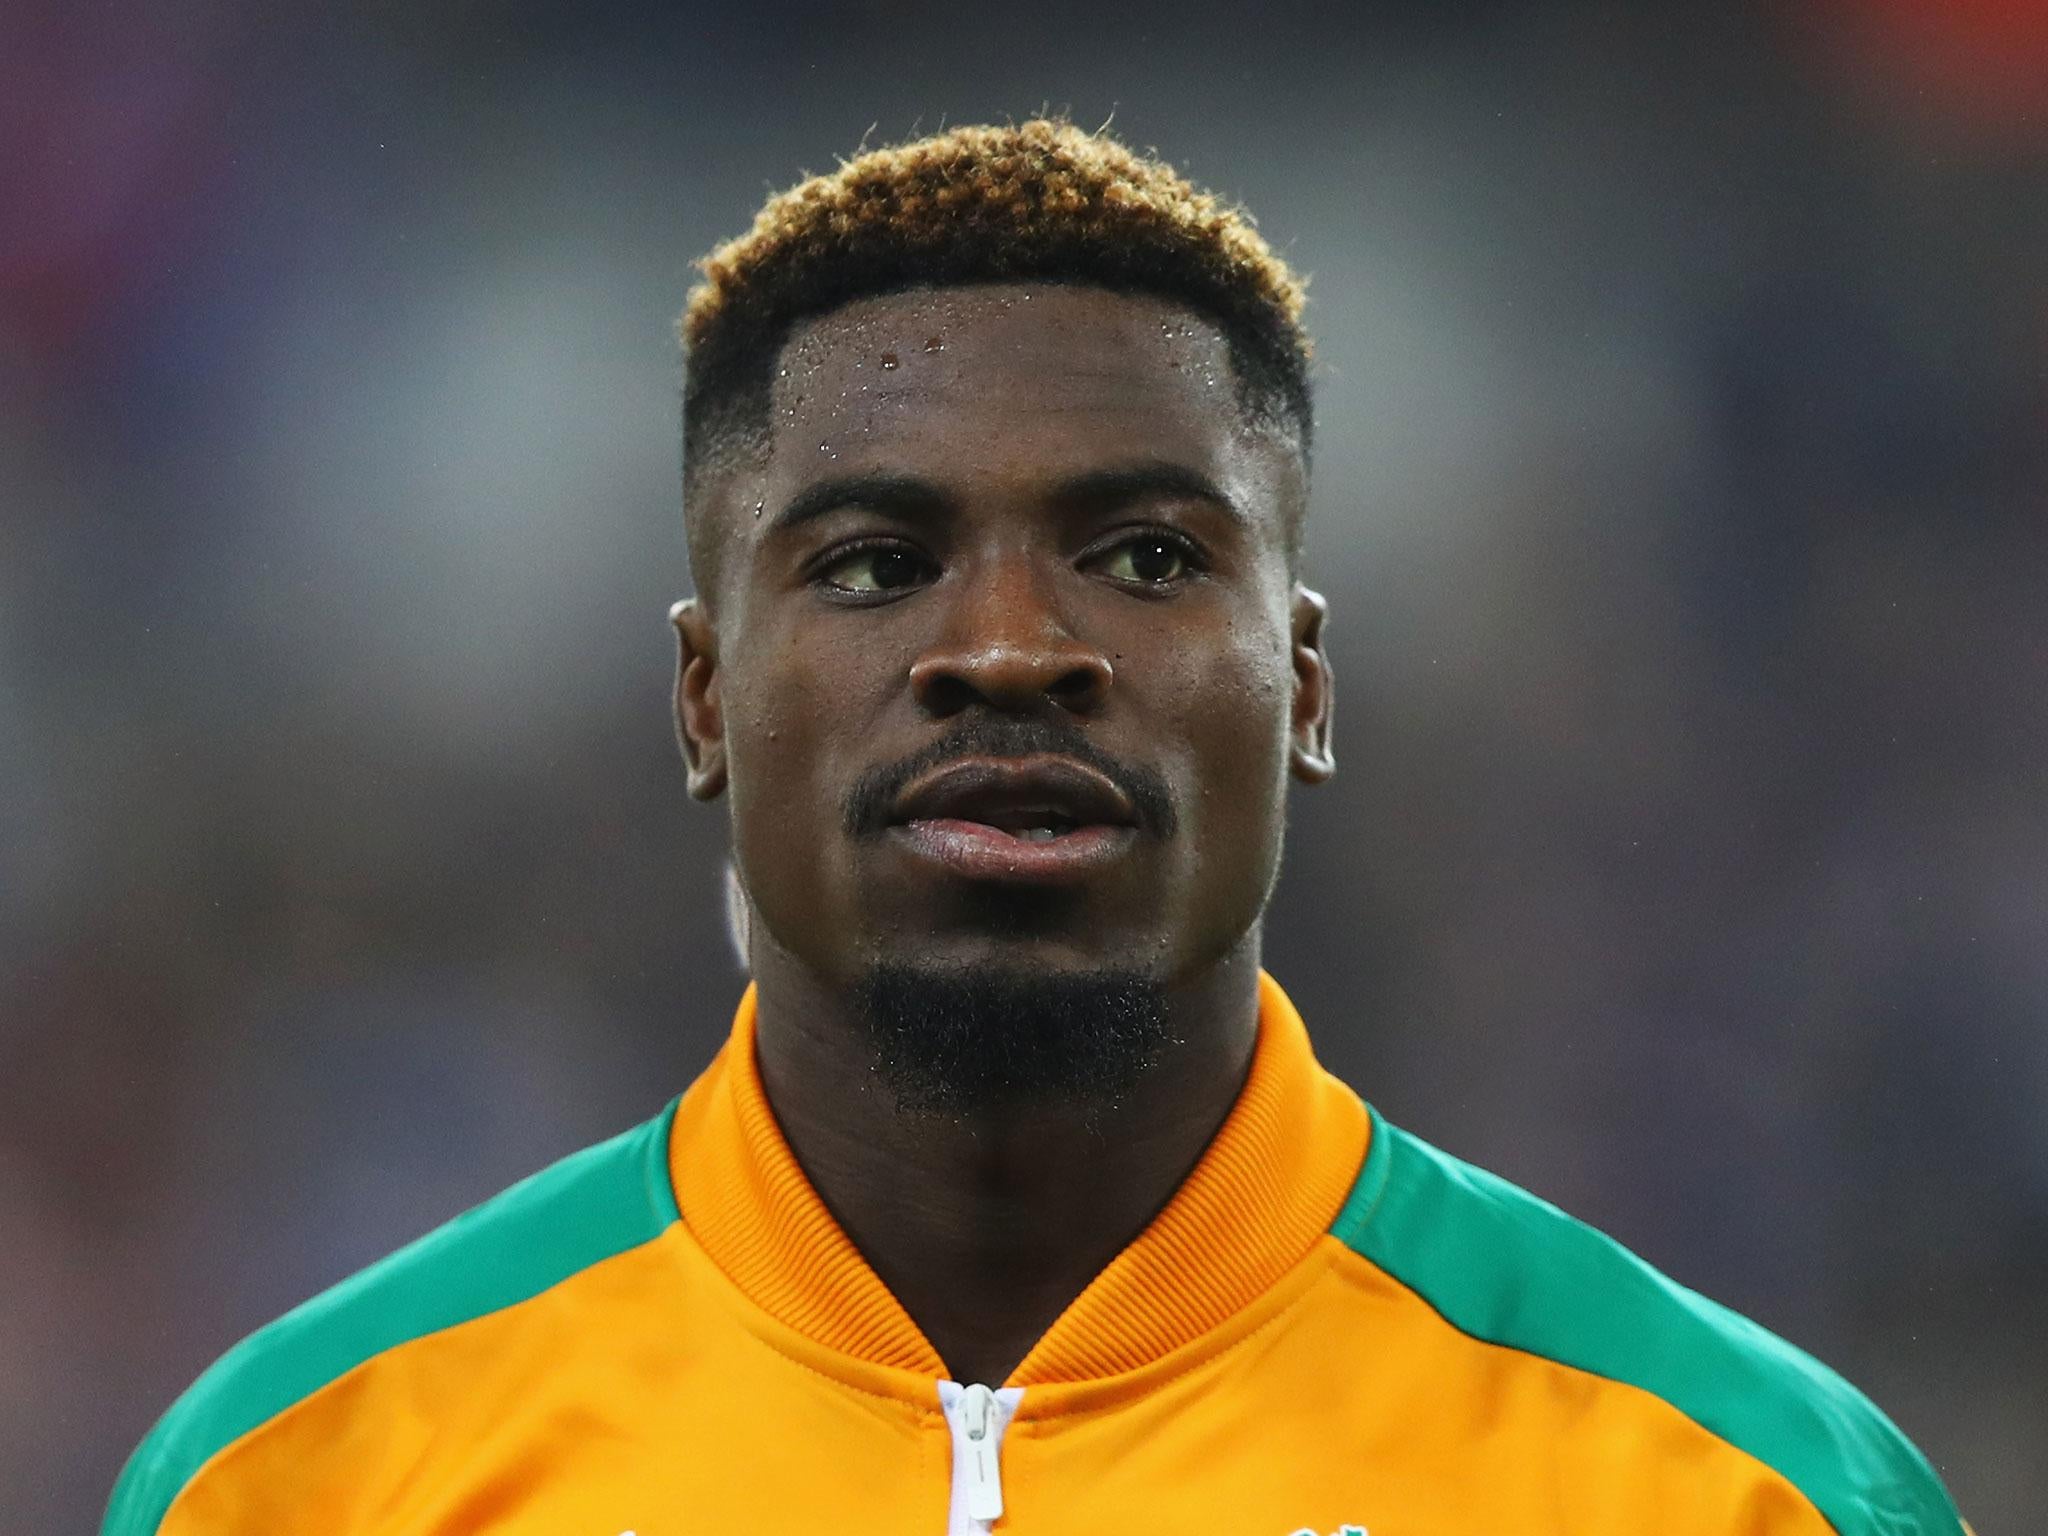 Serge Aurier also believes he has been 'the most influential defender in Ligue 1'